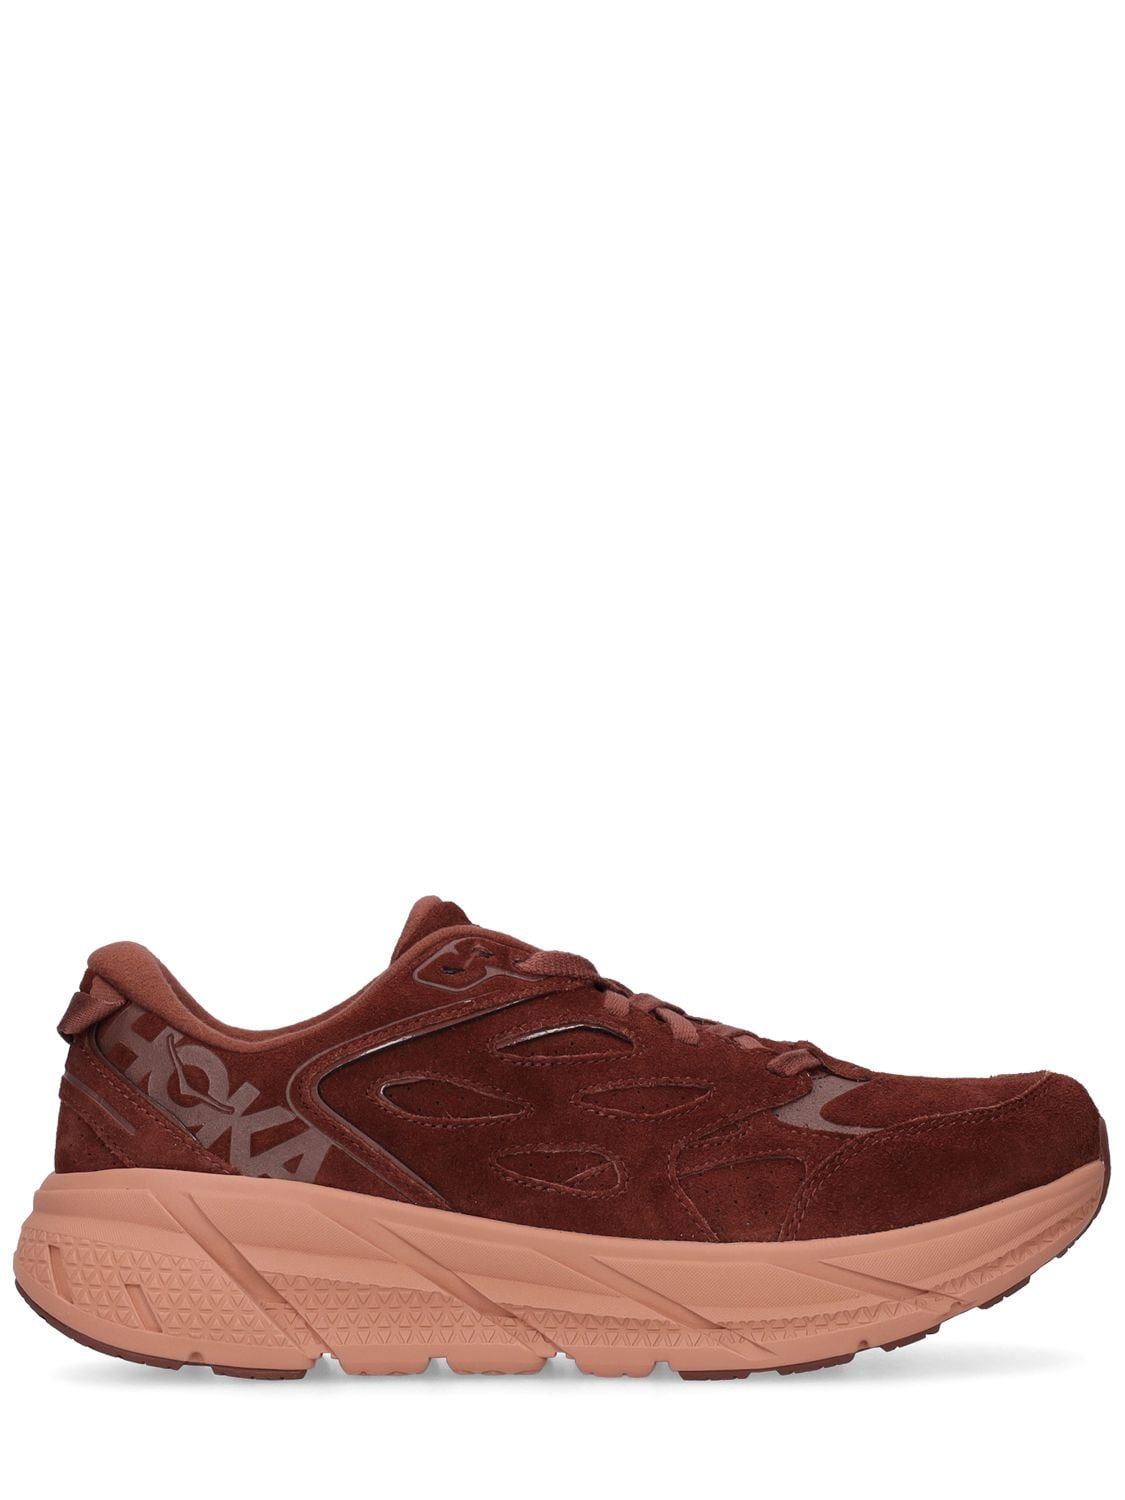 HOKA ONE ONE CLIFTON L SUEDE RUNNING trainers